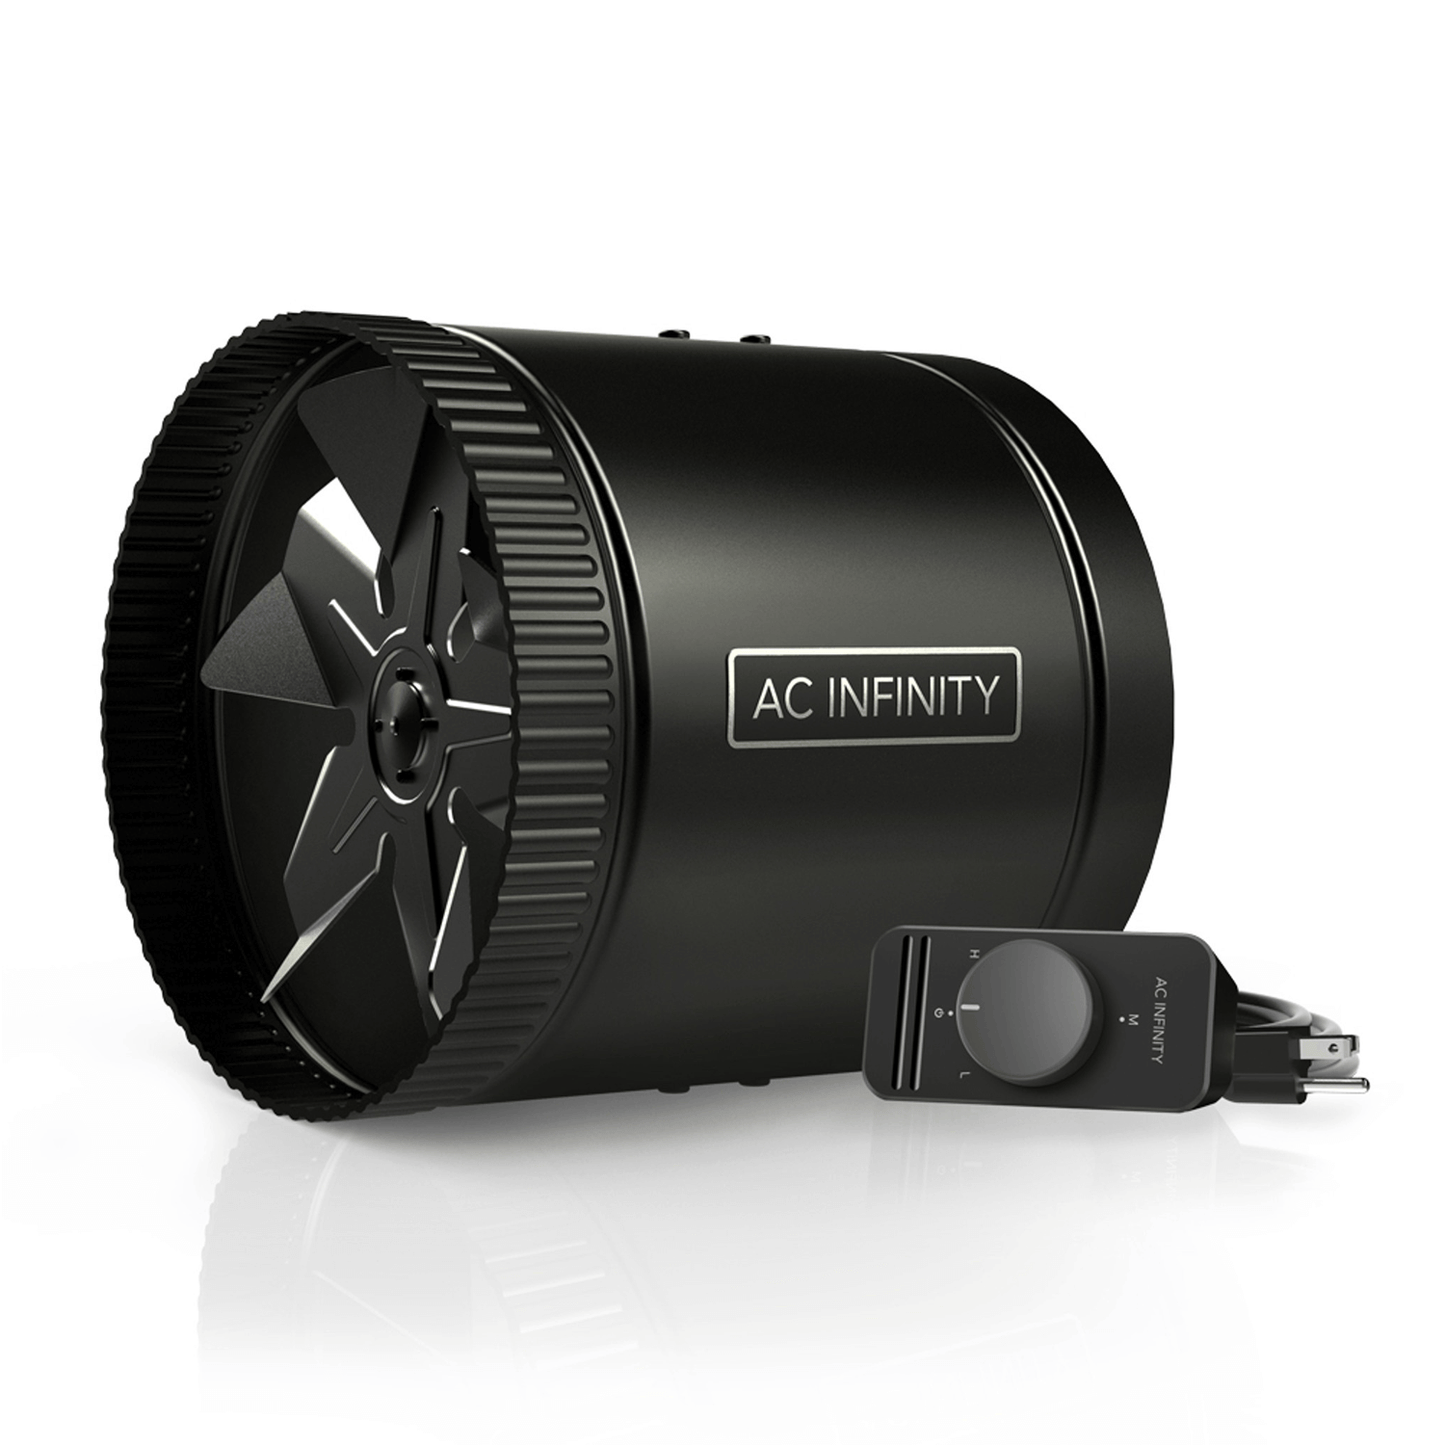 AC Infinity RAXIAL S8, Inline Booster Duct Fan with Speed Controller, 8-Inch AC-RXS8 Climate Control